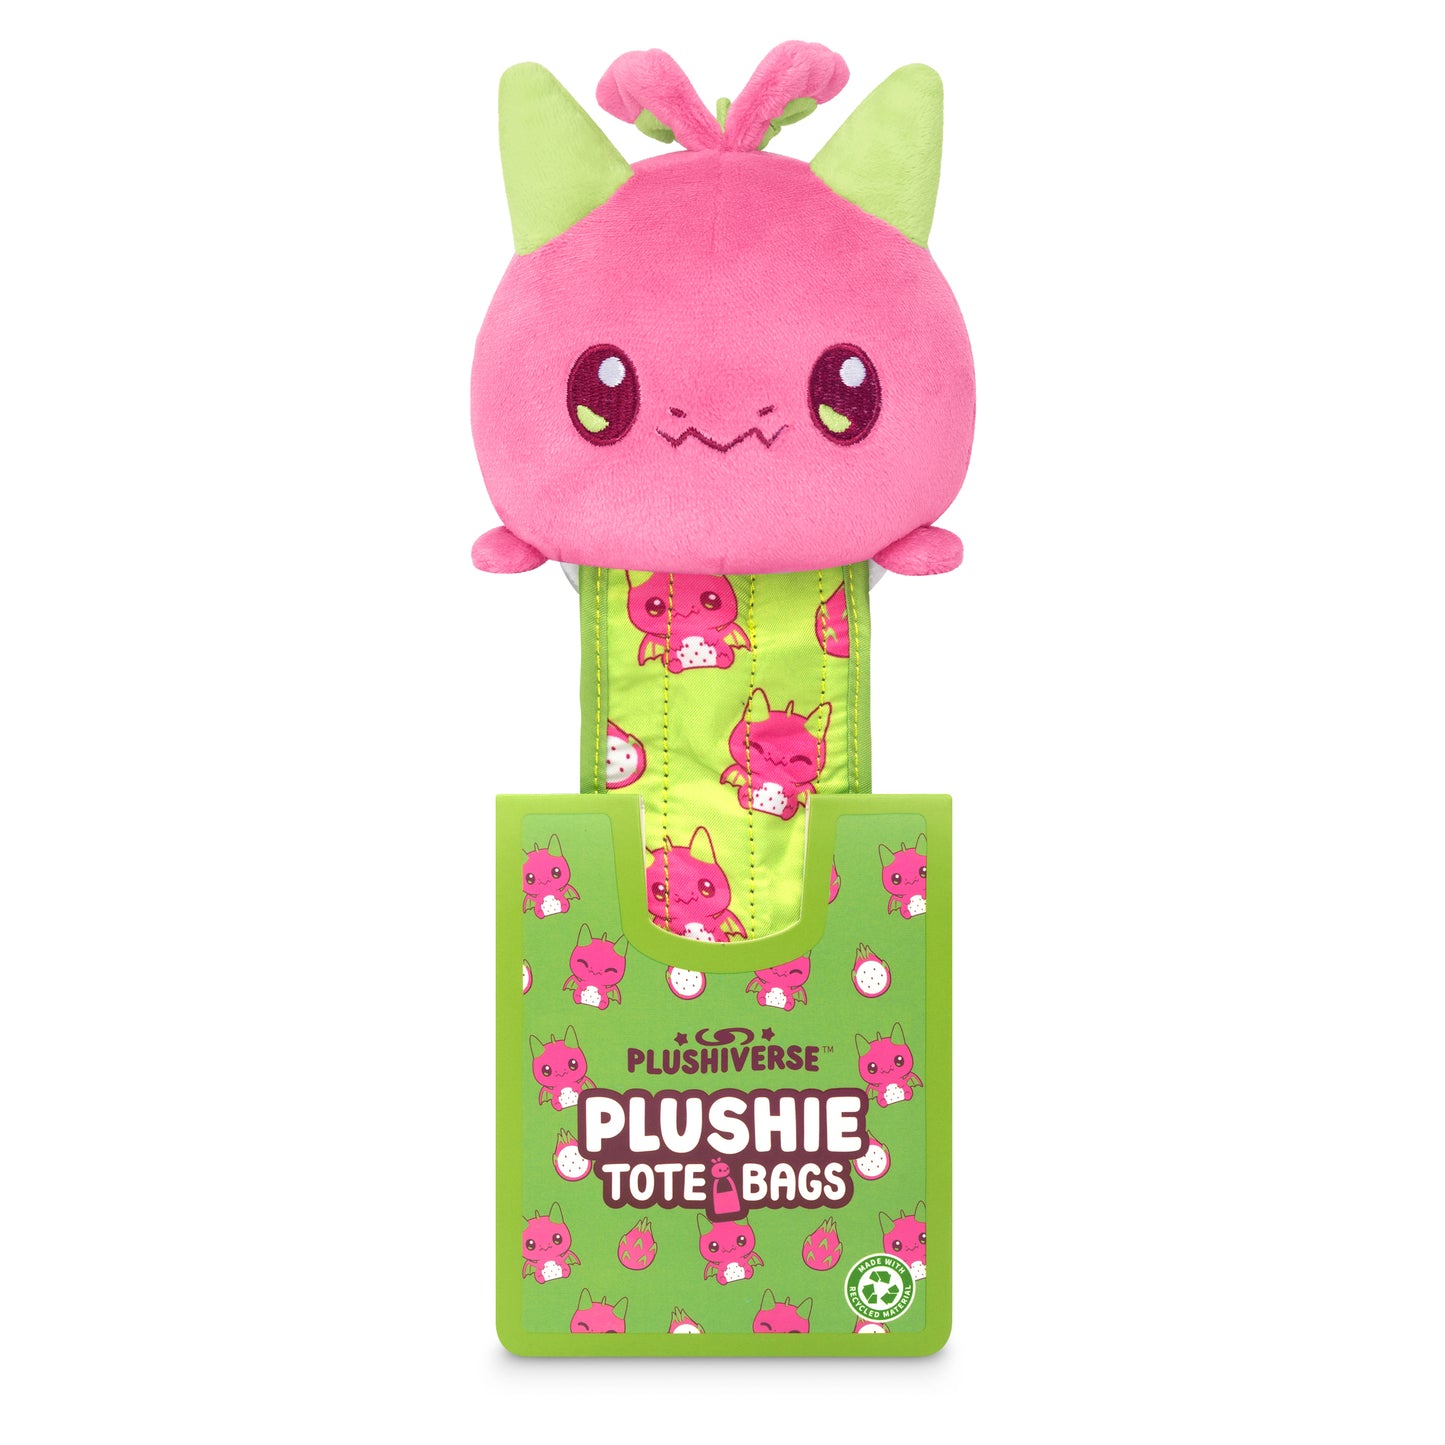 A Plushiverse Dragon Fruit Plushie Tote Bag with green eyes perfect for plushie collectors by TeeTurtle.